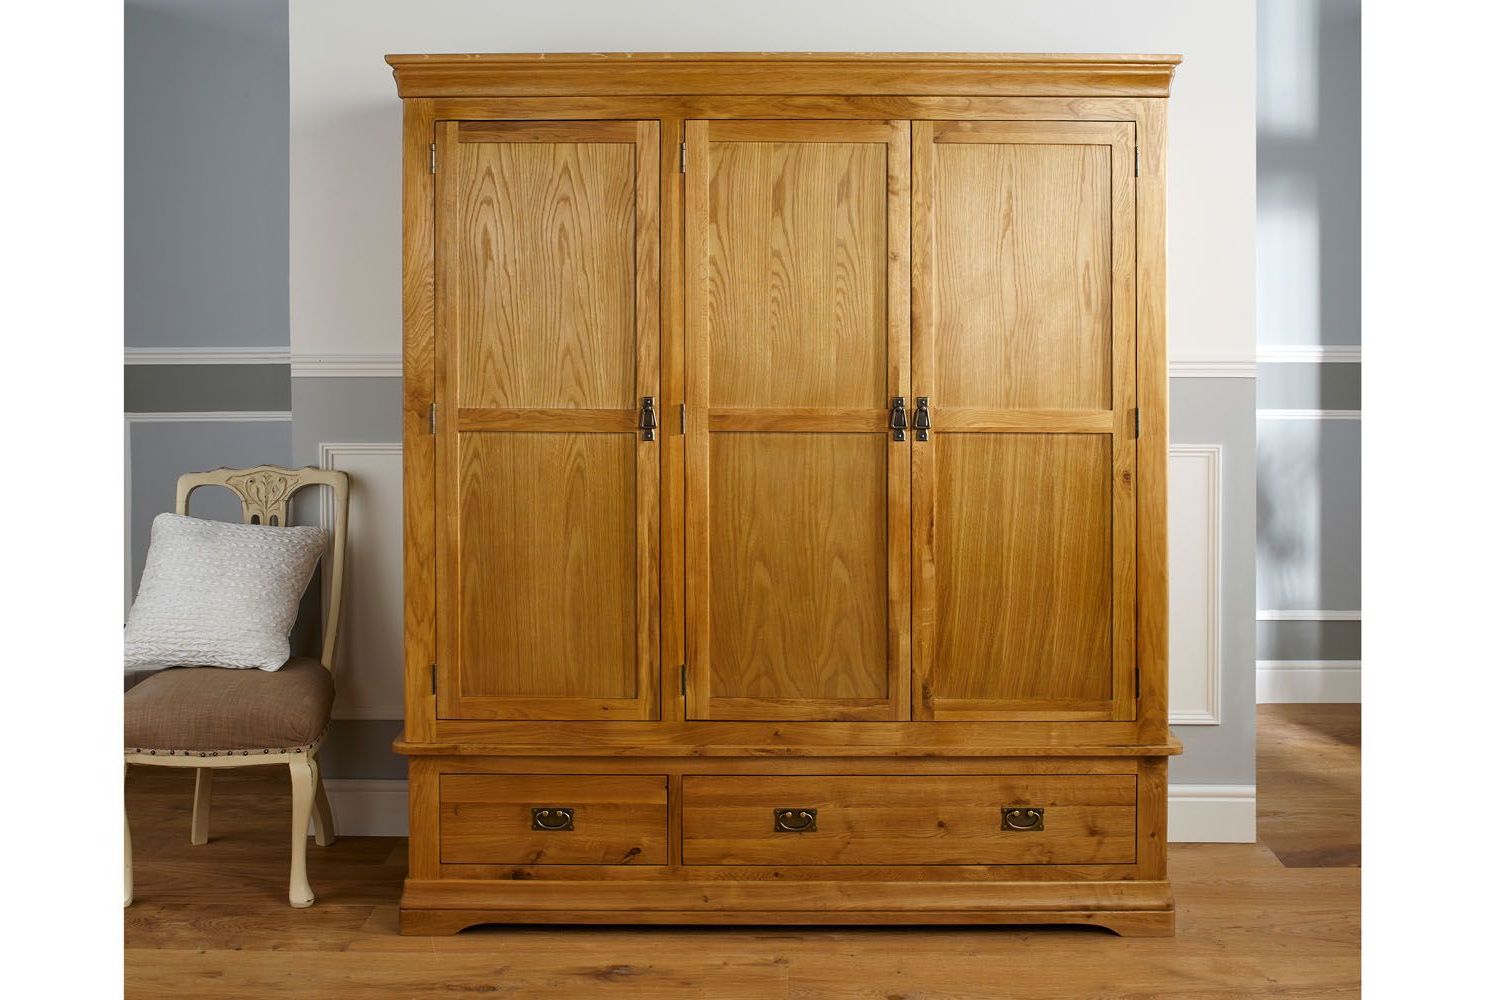 French Farmhouse Large Triple Oak Wardrobe – Free Delivery | Top Furniture With Regard To Triple Oak Wardrobes (View 4 of 20)